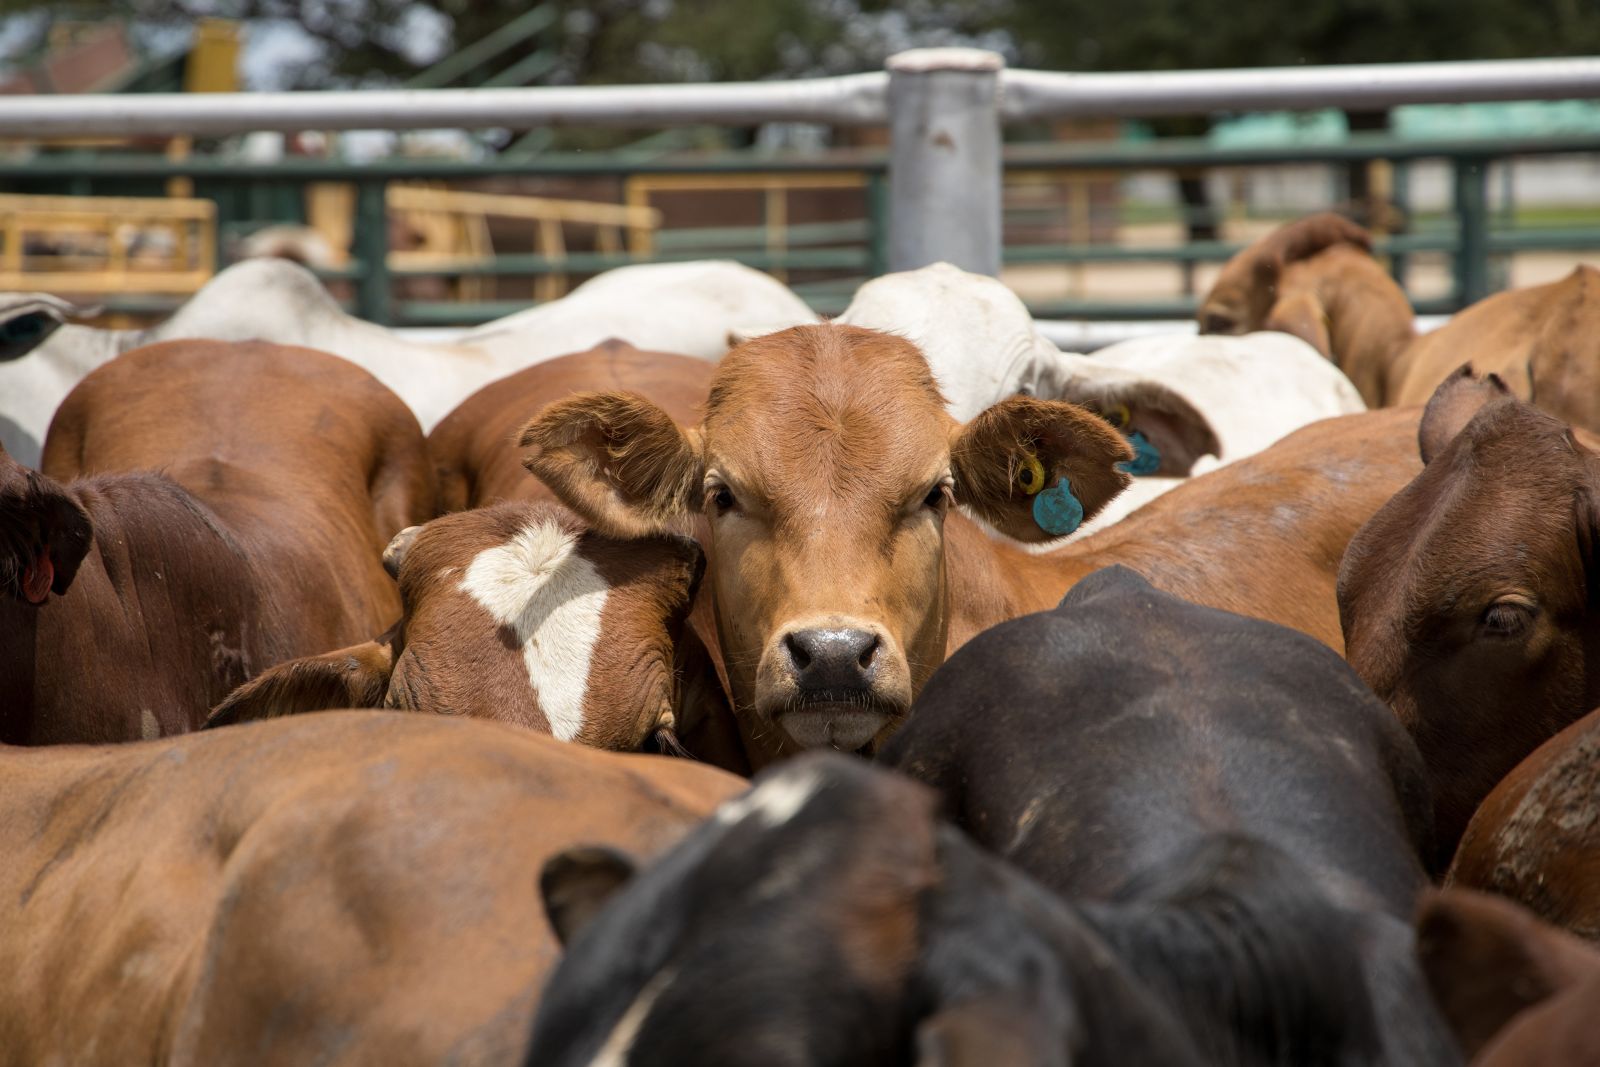 Cattle & Beef - Cattle in feed lot by Clinton Austin via iStock